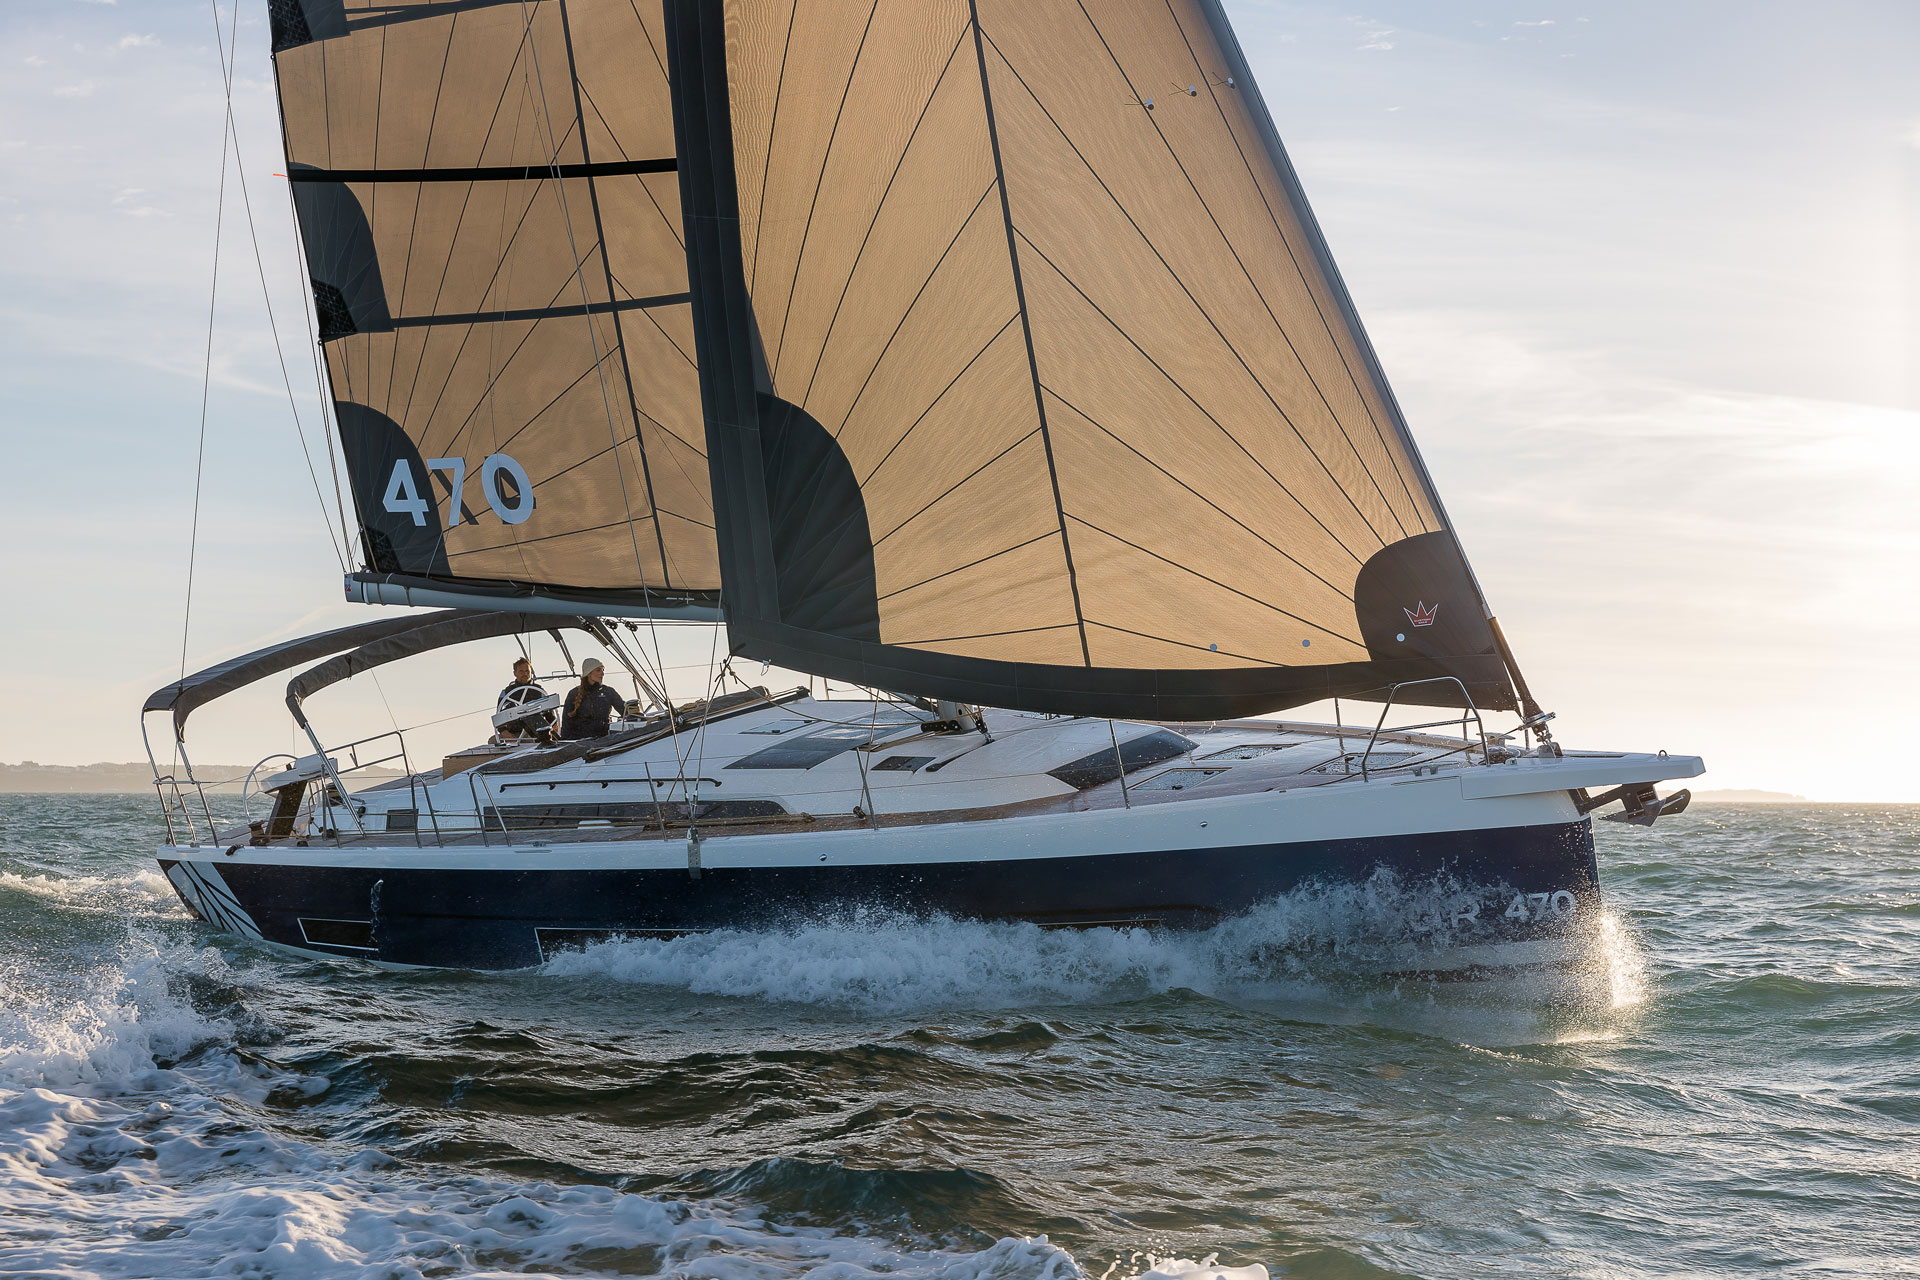 luxury sailing yachts dufour 470 boat